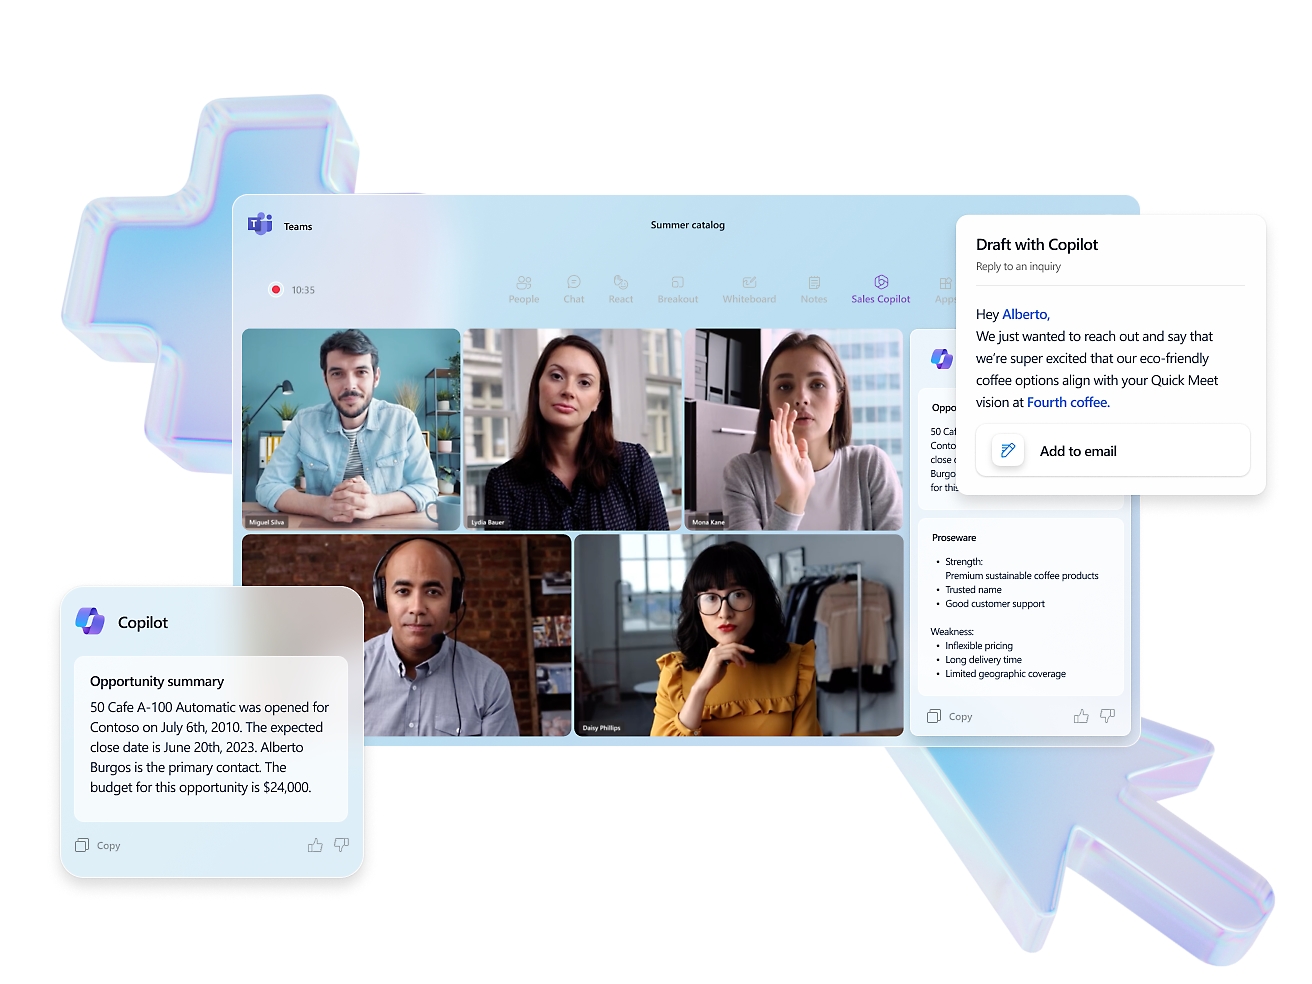 Window showing Microsoft teams video call and multiple dialog boxes showing various text using copilot